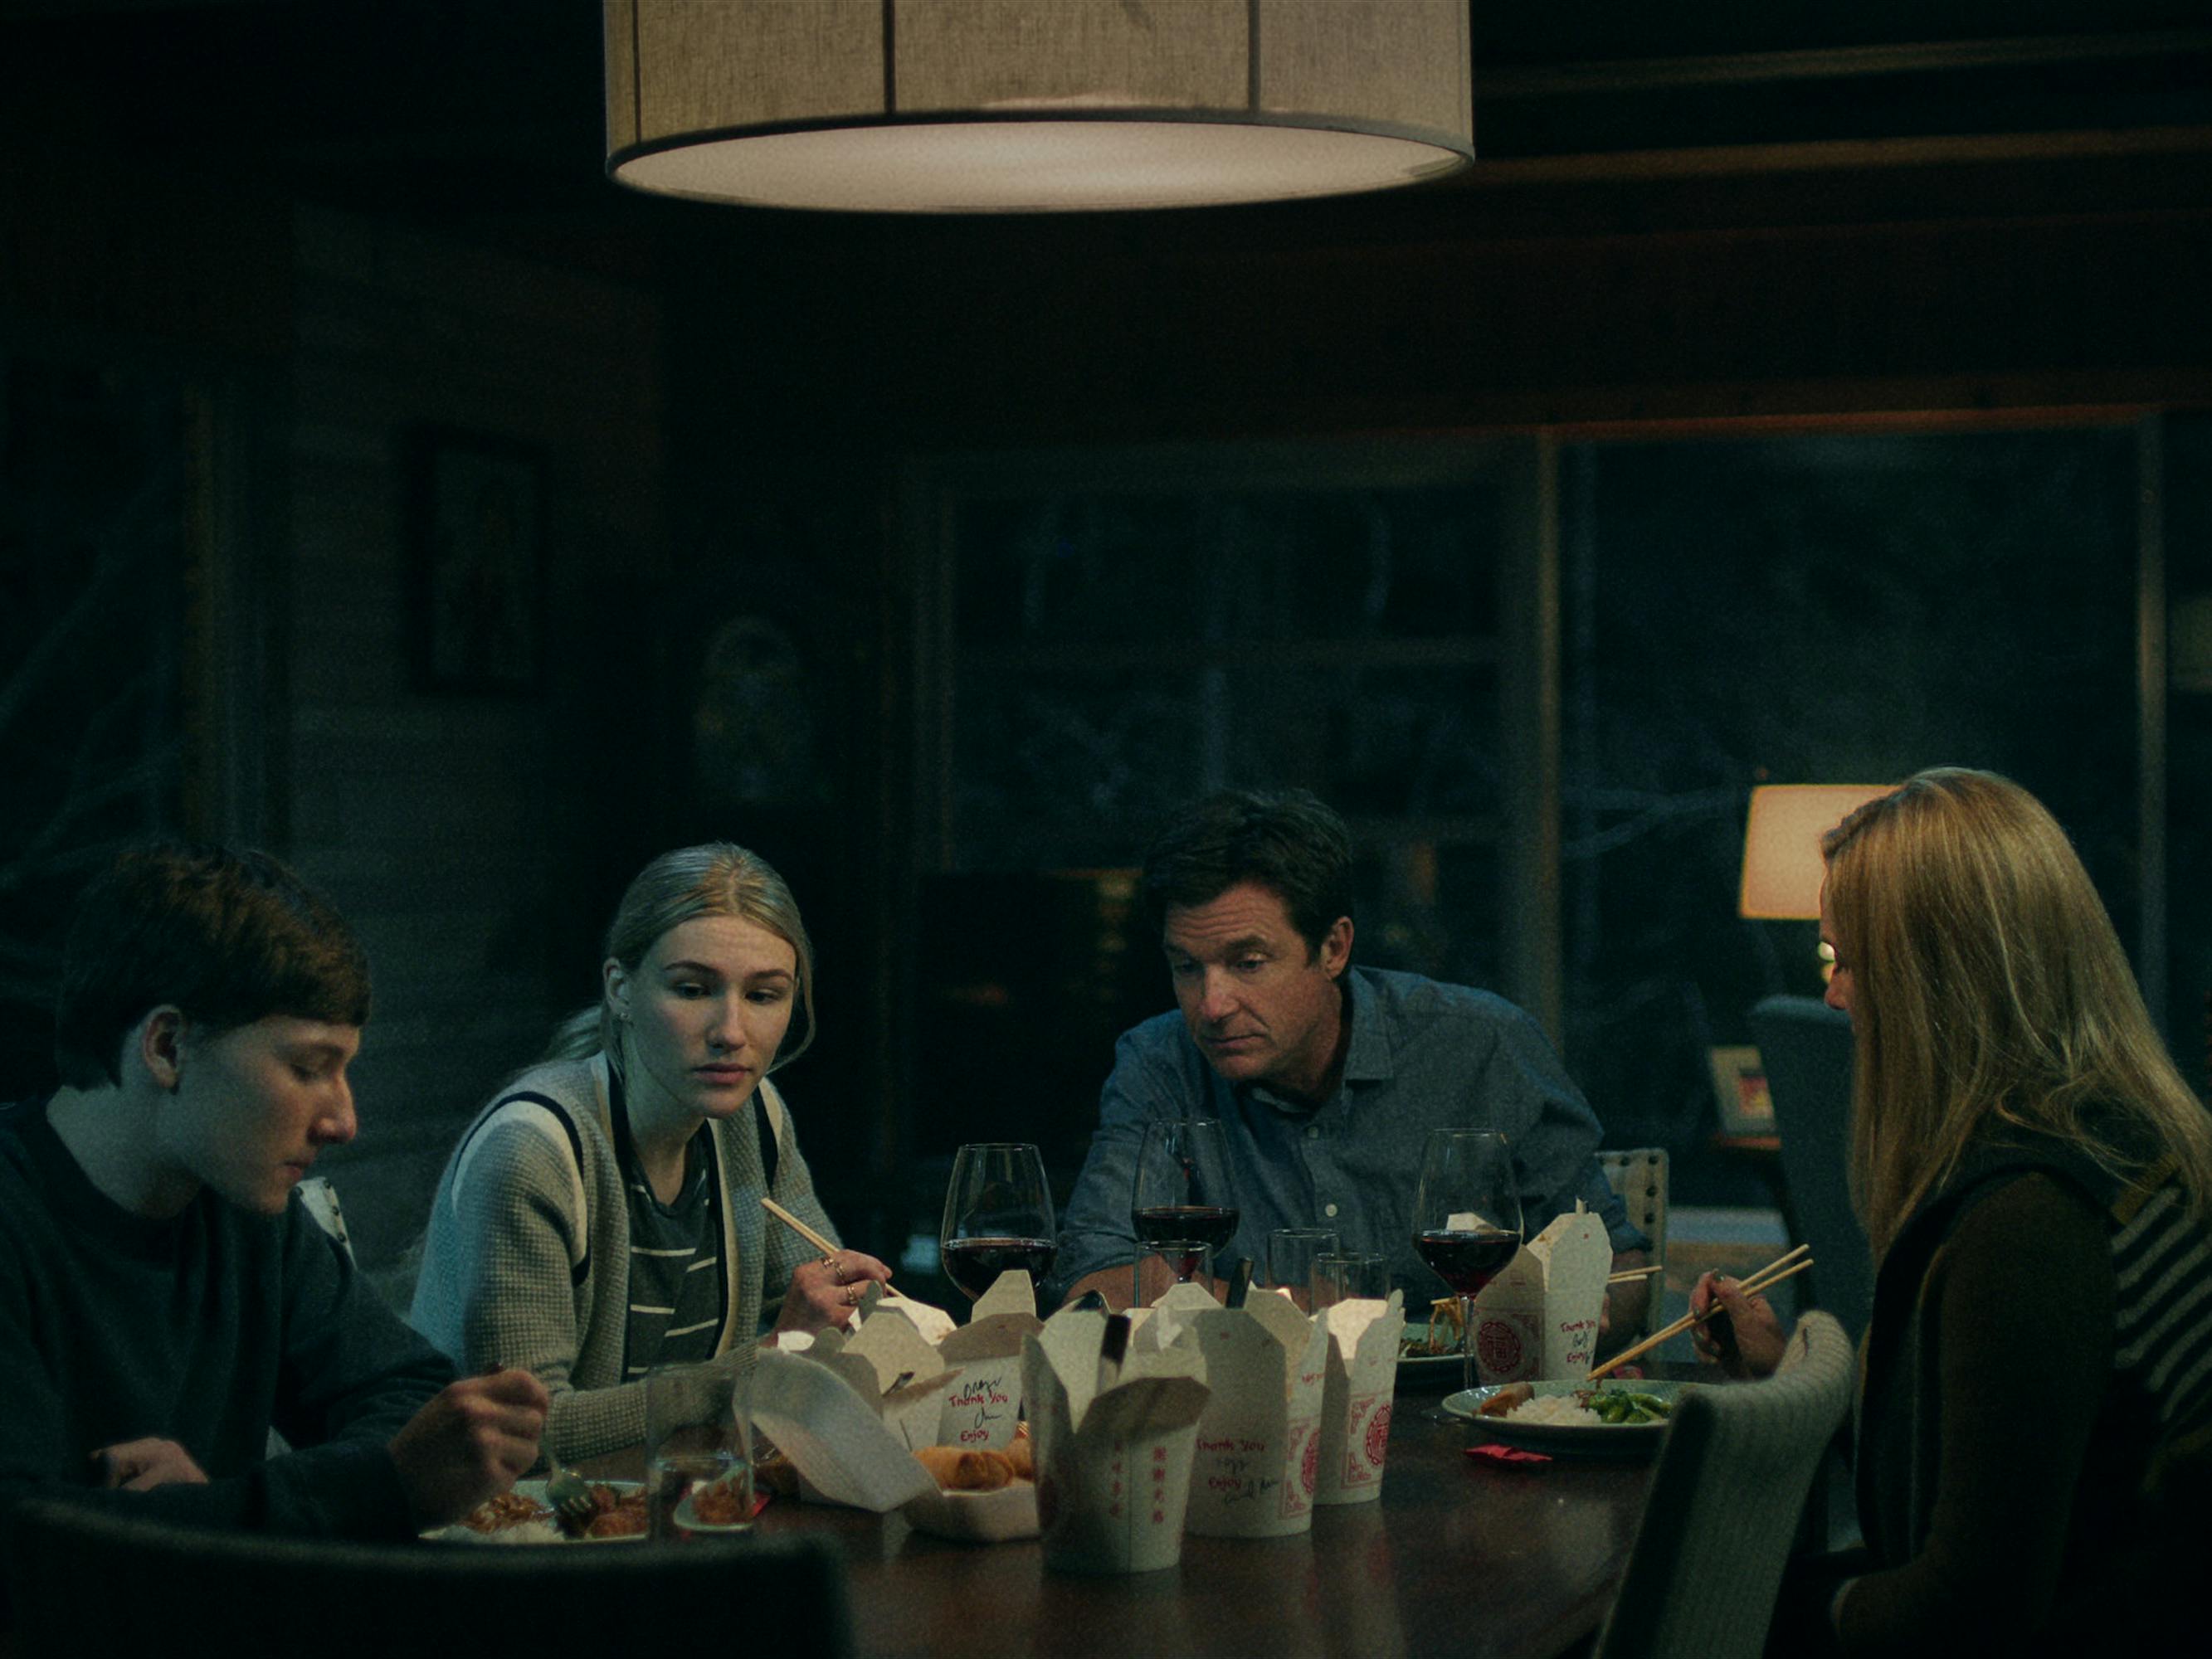 Skylar Gaertner, Sofia Hublitz, Jason Bateman, and Laura Linney sit around a dinner table filled with Chinese takeout.  